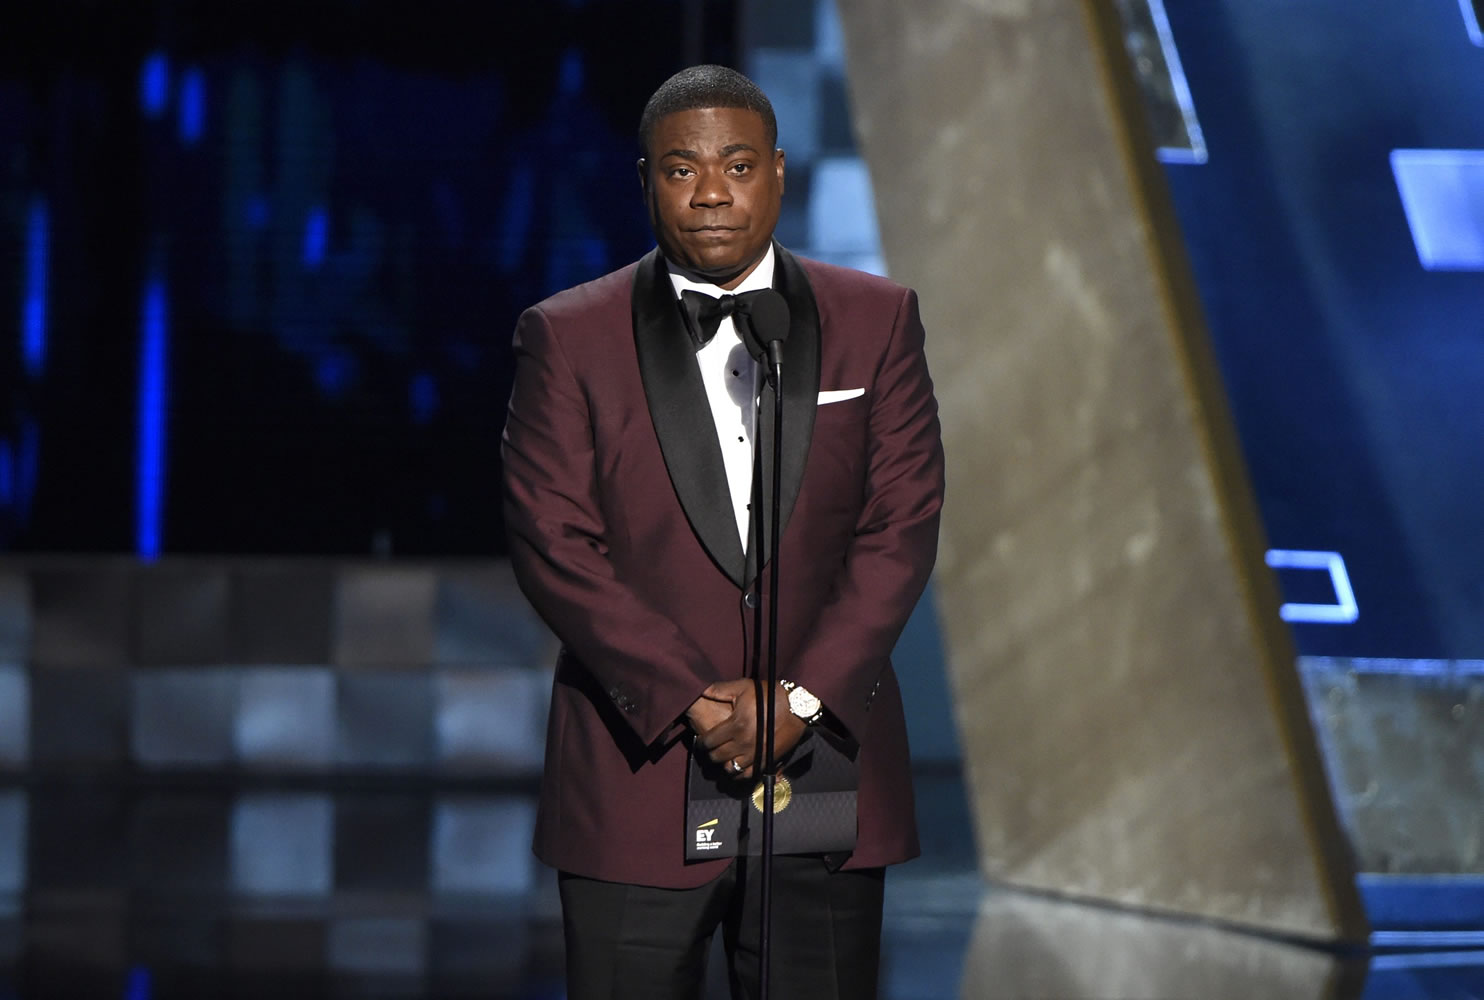 Tracy Morgan may soon be returning to regular television work at the FX network. FX announced that Morgan will develop and star in a comedy pilot about a career criminal trying to make it back into society after 15 years in prison.